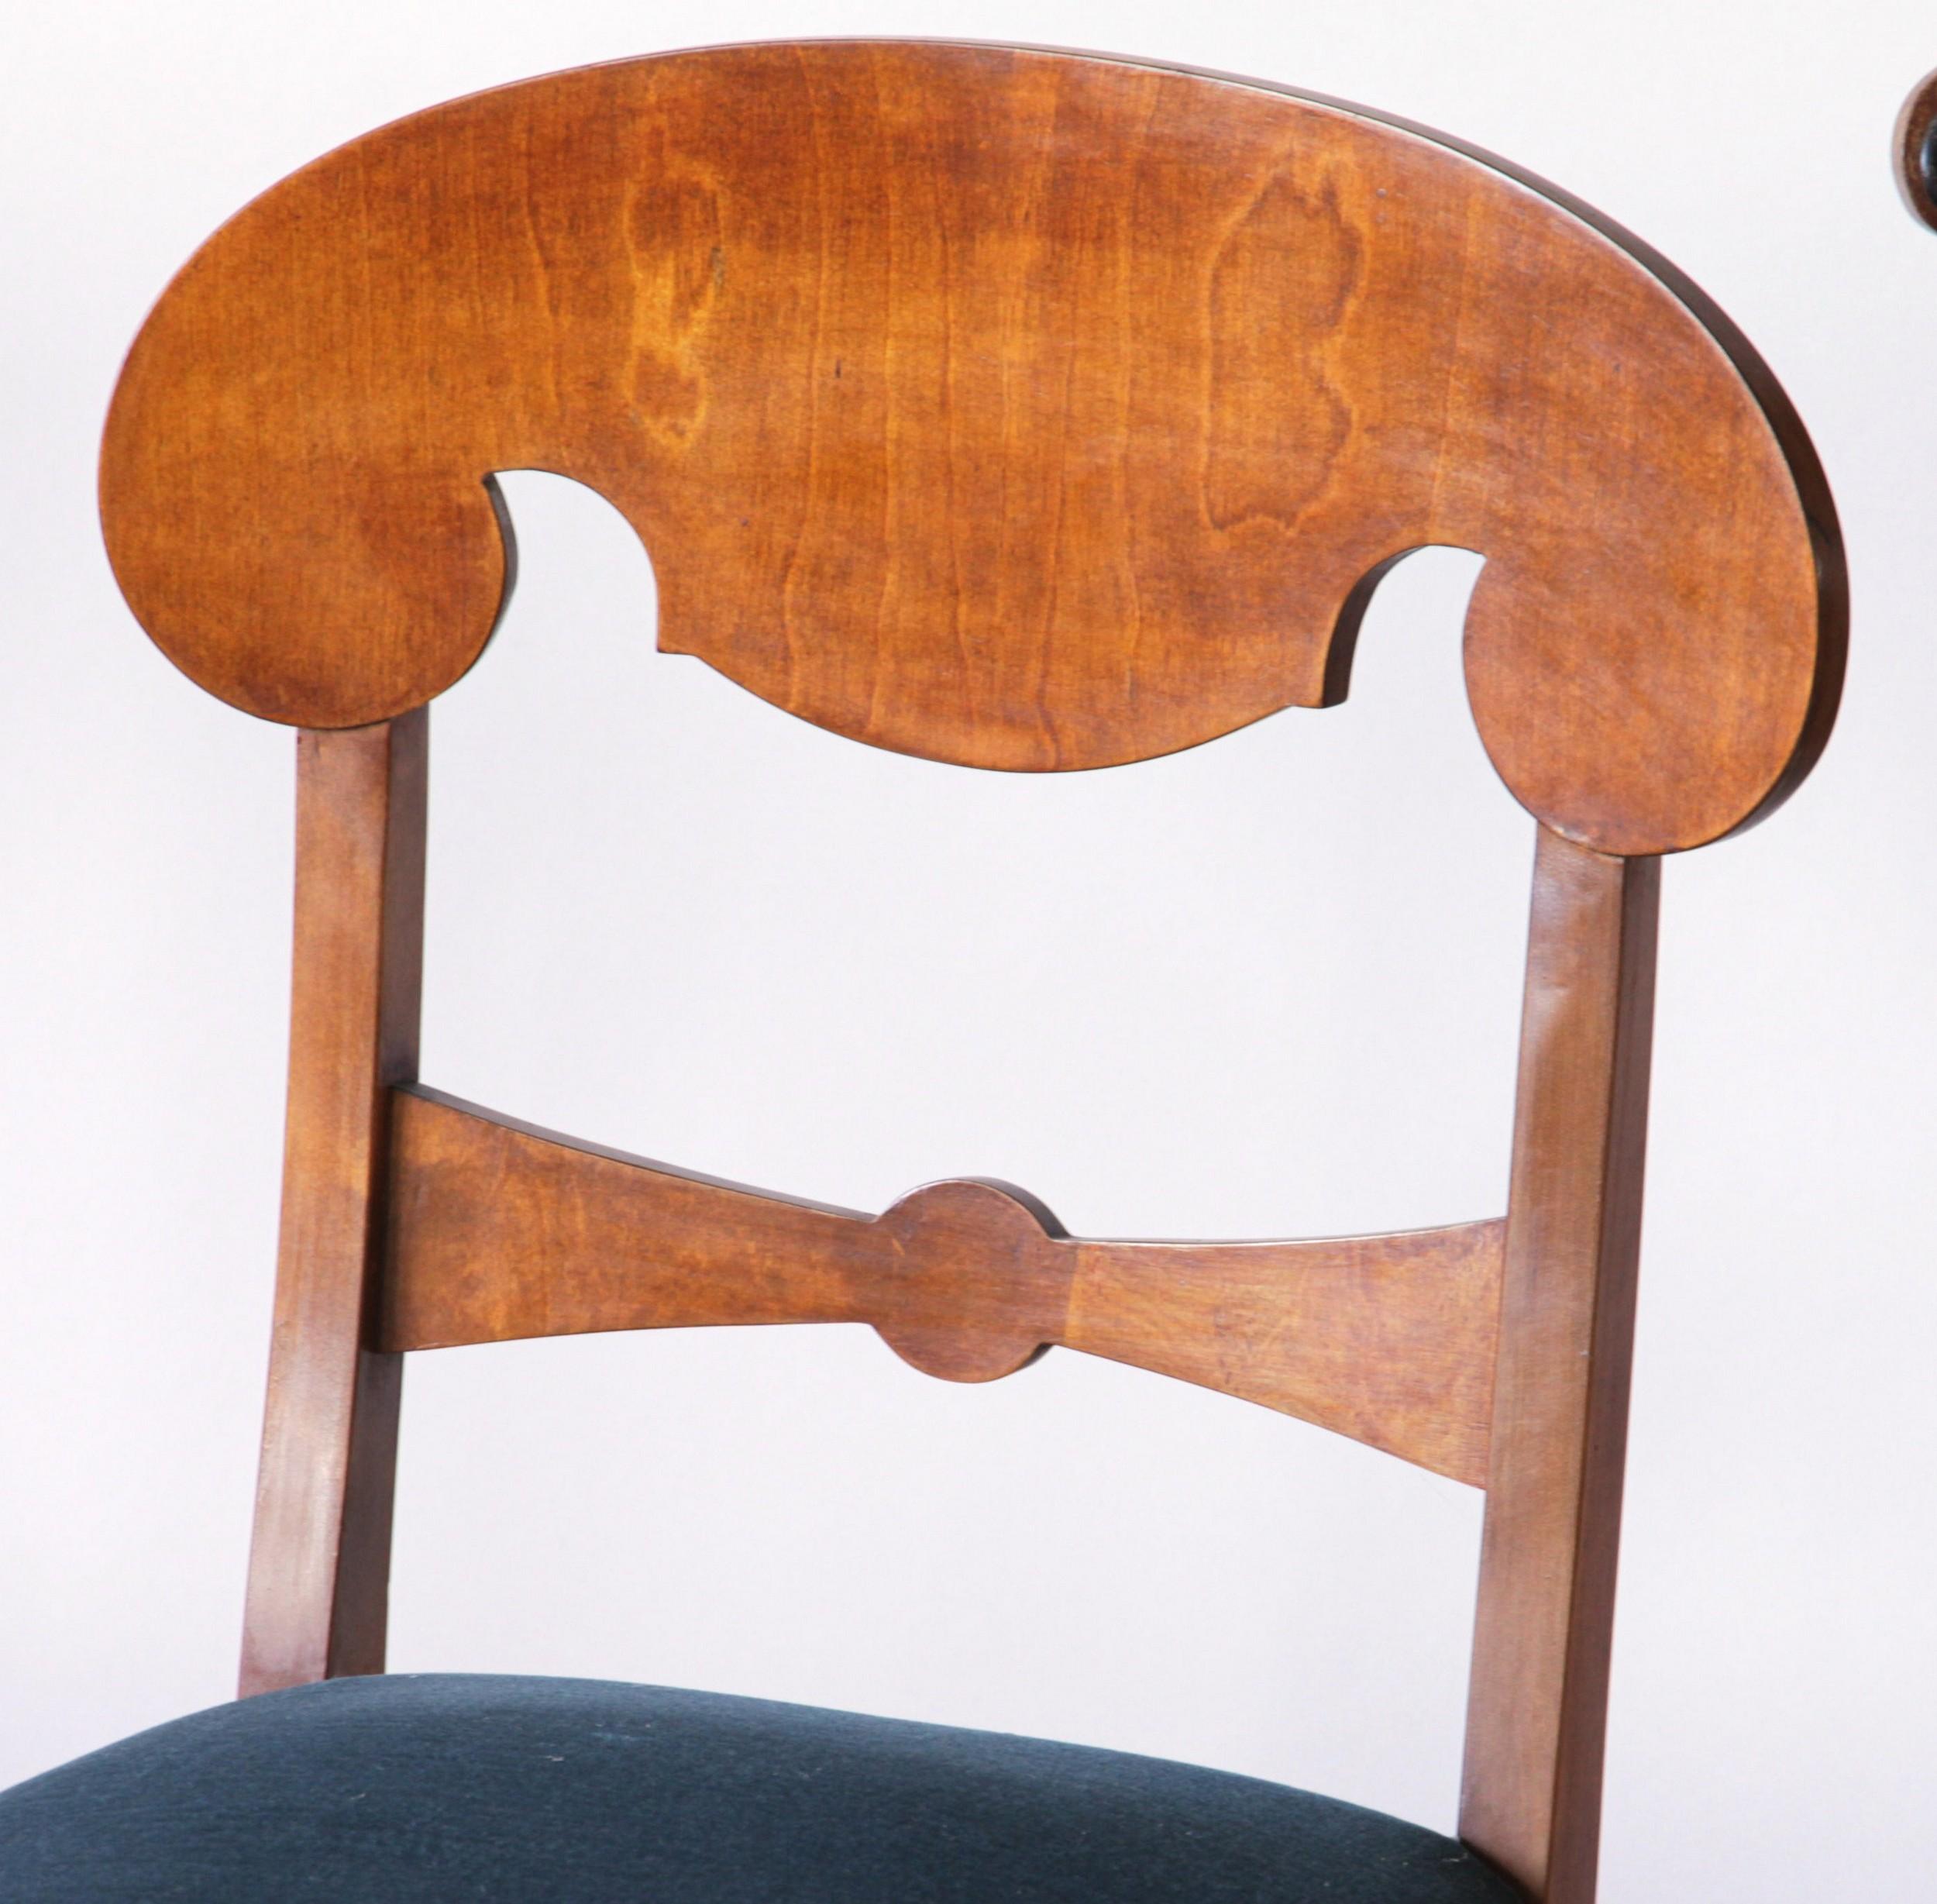 Rosewood Biedermeier Eclectic Set, Unique Set of 8 Dining Chairs Each in Different Design